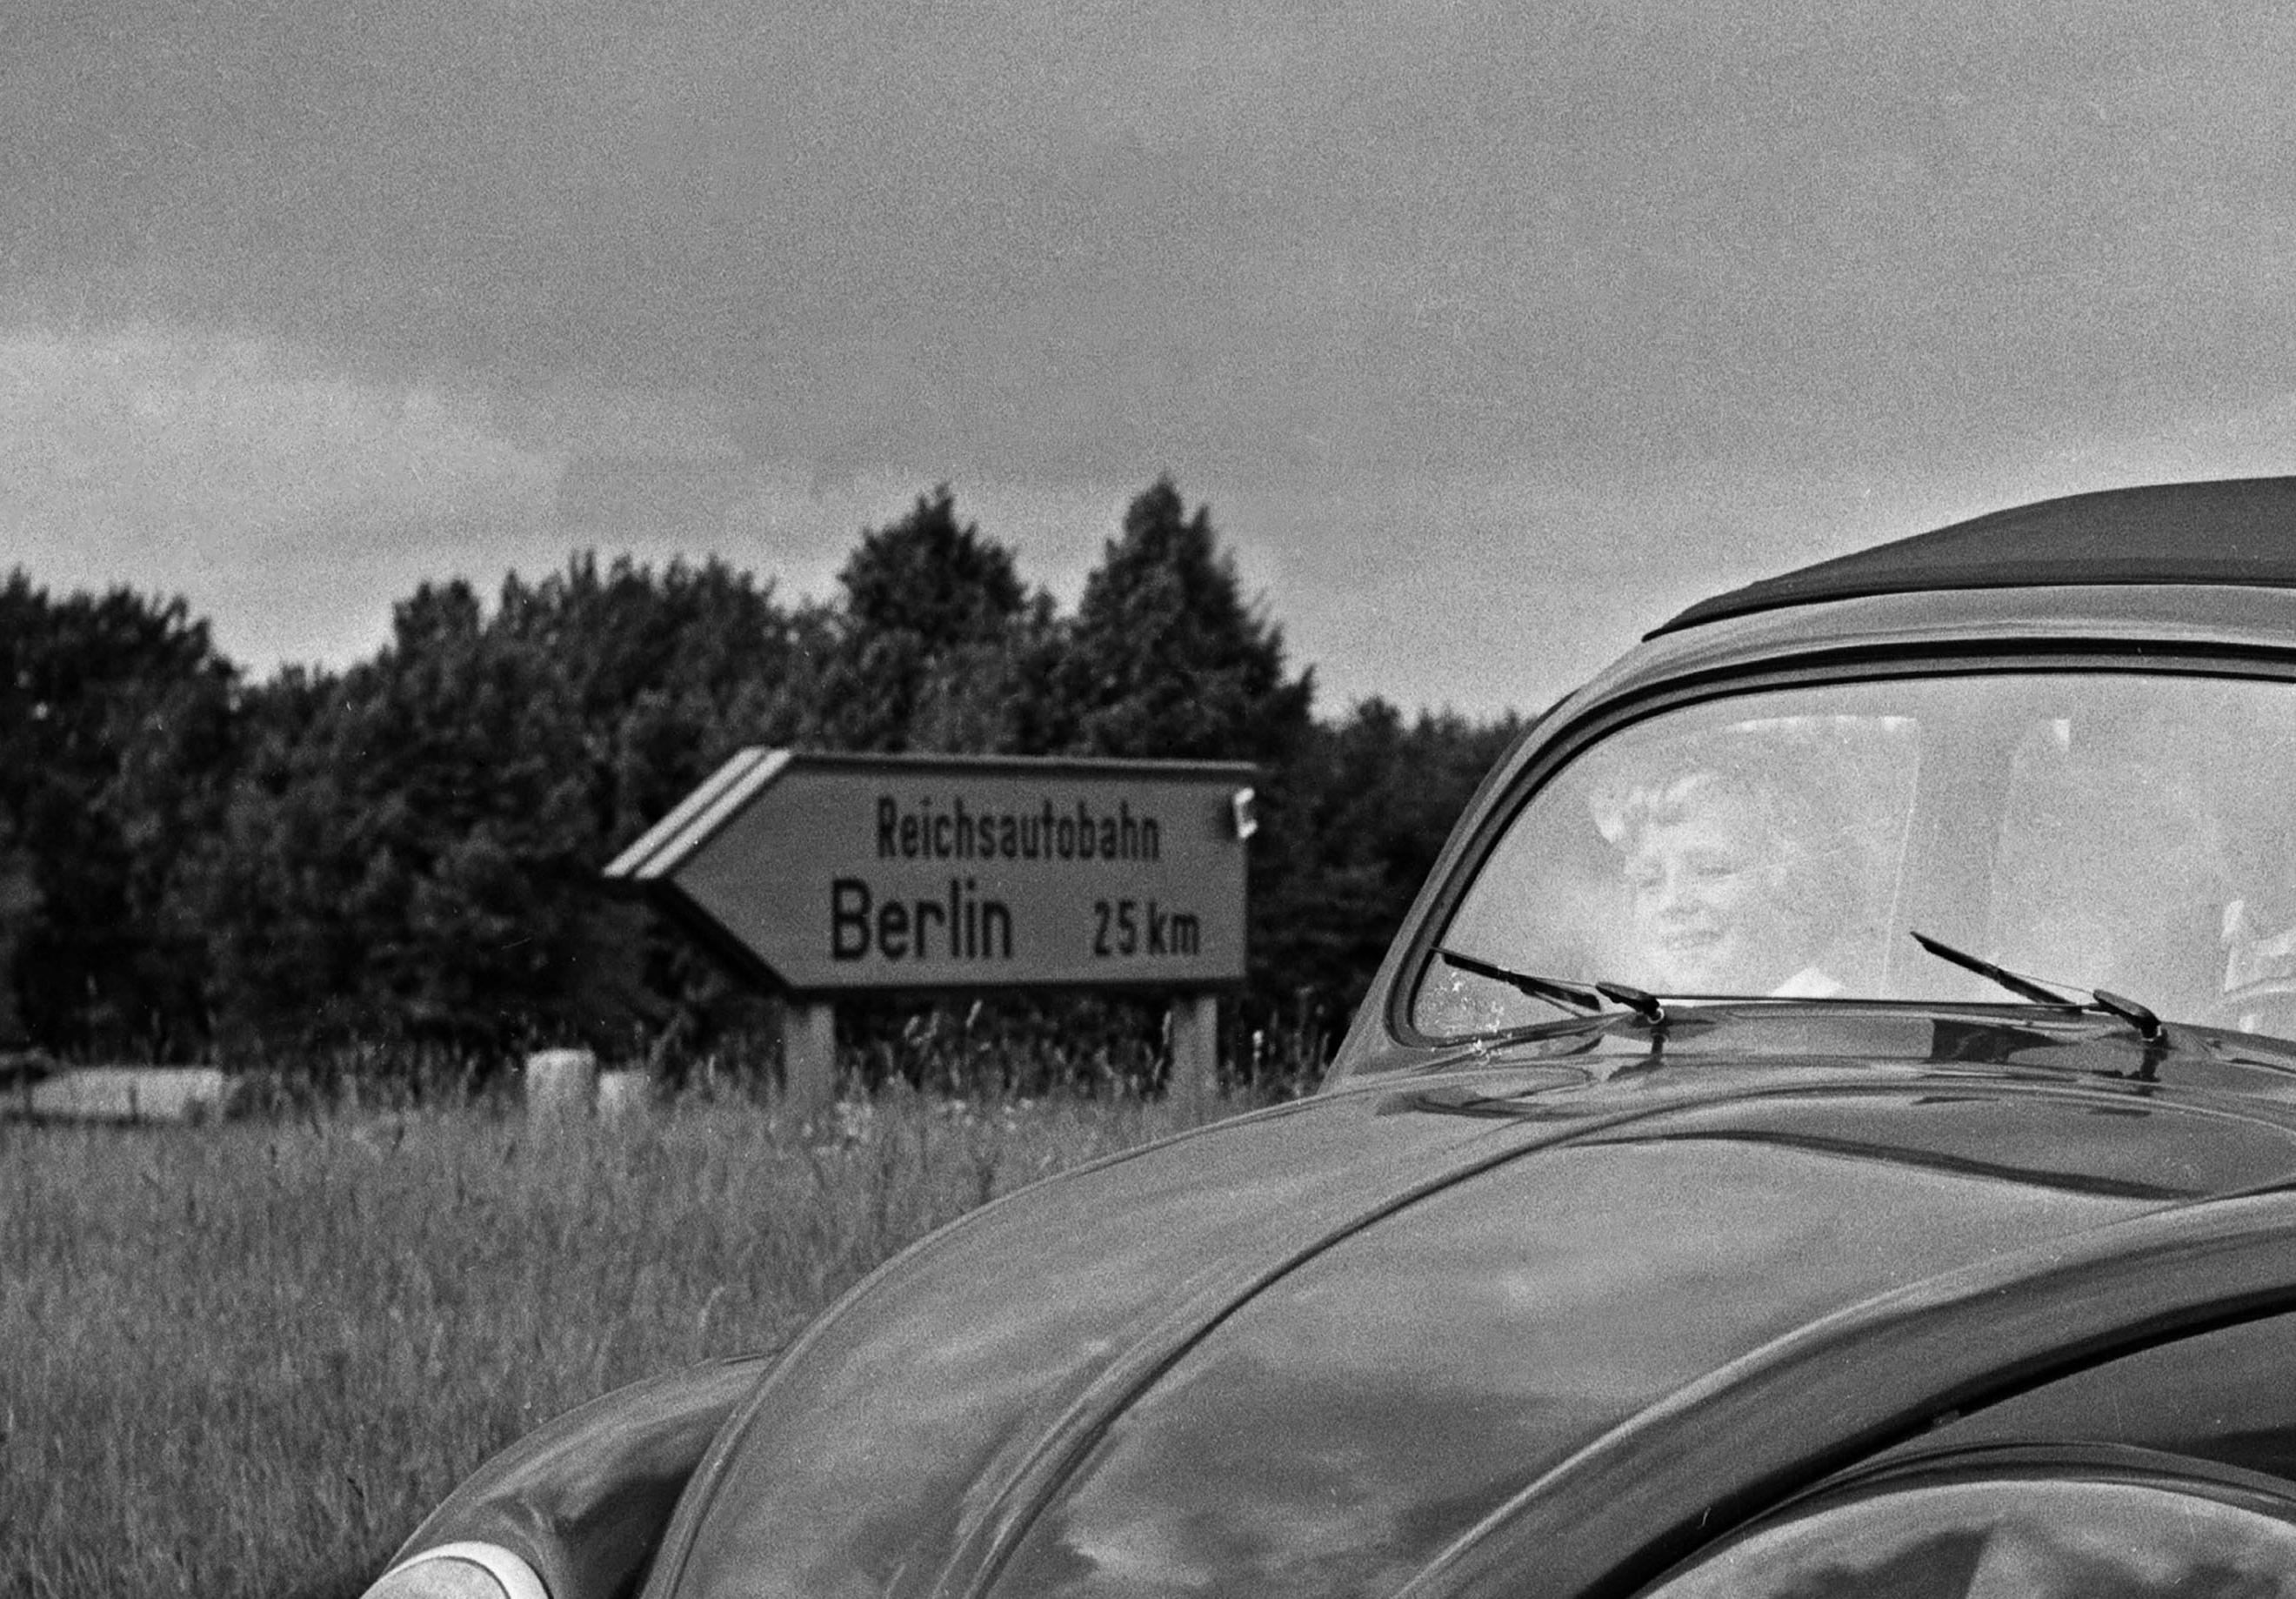 Volkswagen beetle parking on the streets, Germany 1939 Printed Later  - Photograph by Karl Heinrich Lämmel